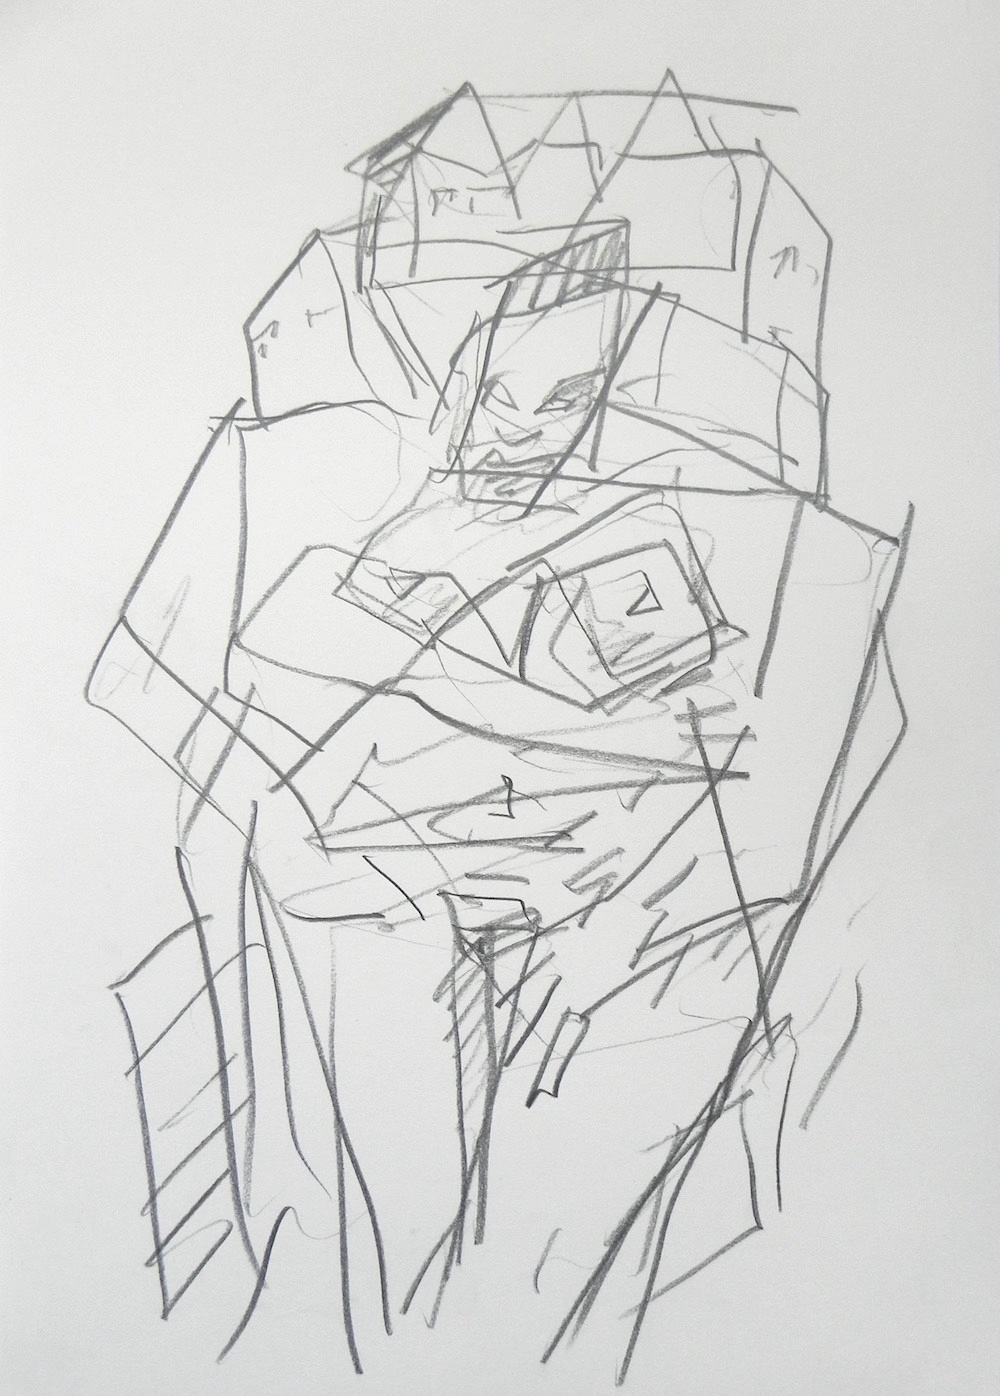 Drawing: Figure like forms fastly drawn with pencil.